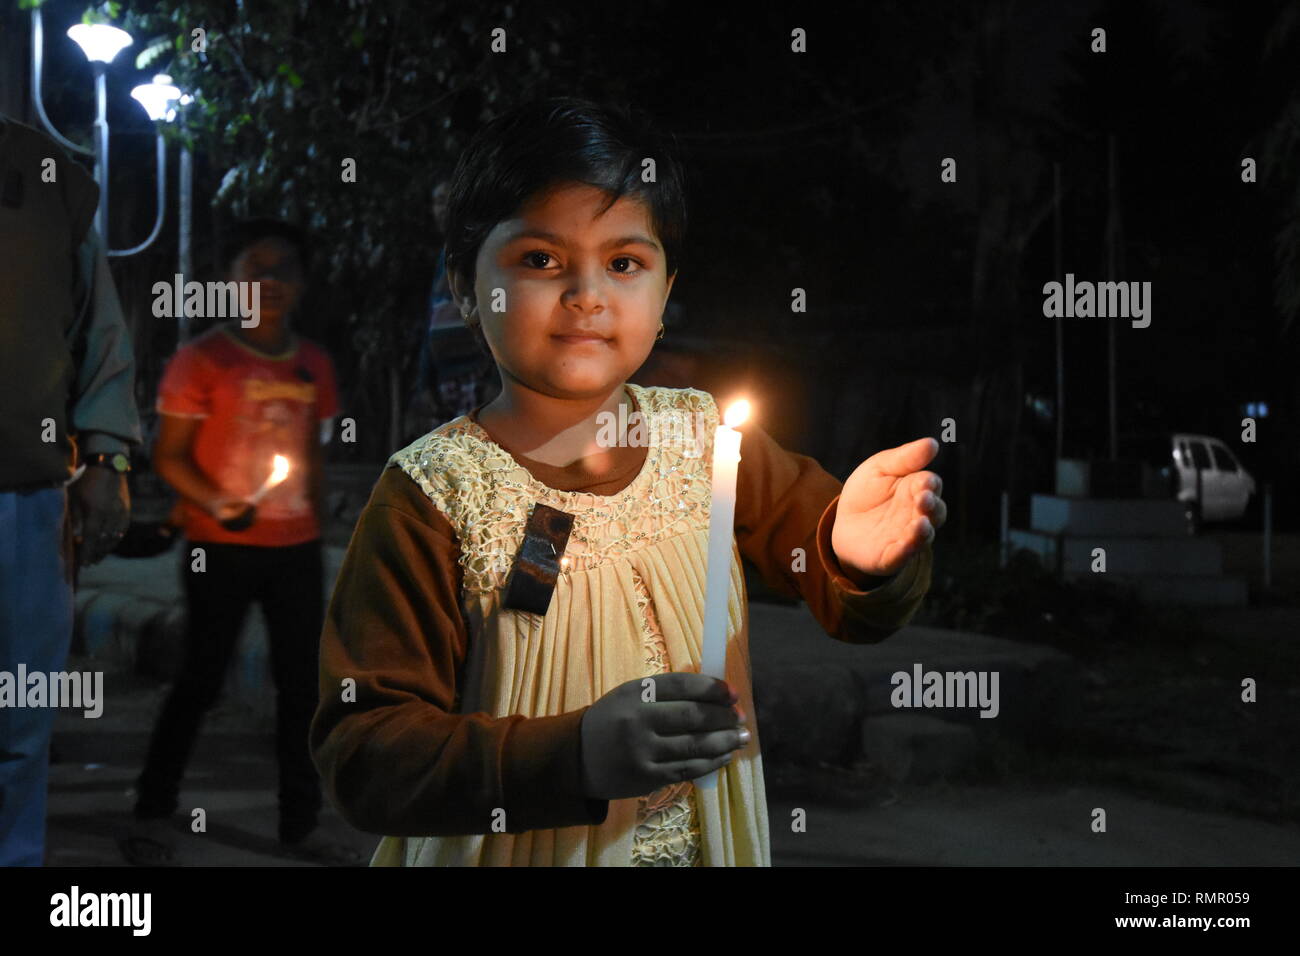 Howrah City, Kolkata, India. 16th February, 2019. Indian people in a candlelight vigil in protest against the Pulwama terror attack on 14th February, 2019, in Kashmir where 49 paramilitary troopers were killed in one of the deadliest militant attacks in Kashmir. Credit: Biswarup Ganguly/Alamy Live News Stock Photo